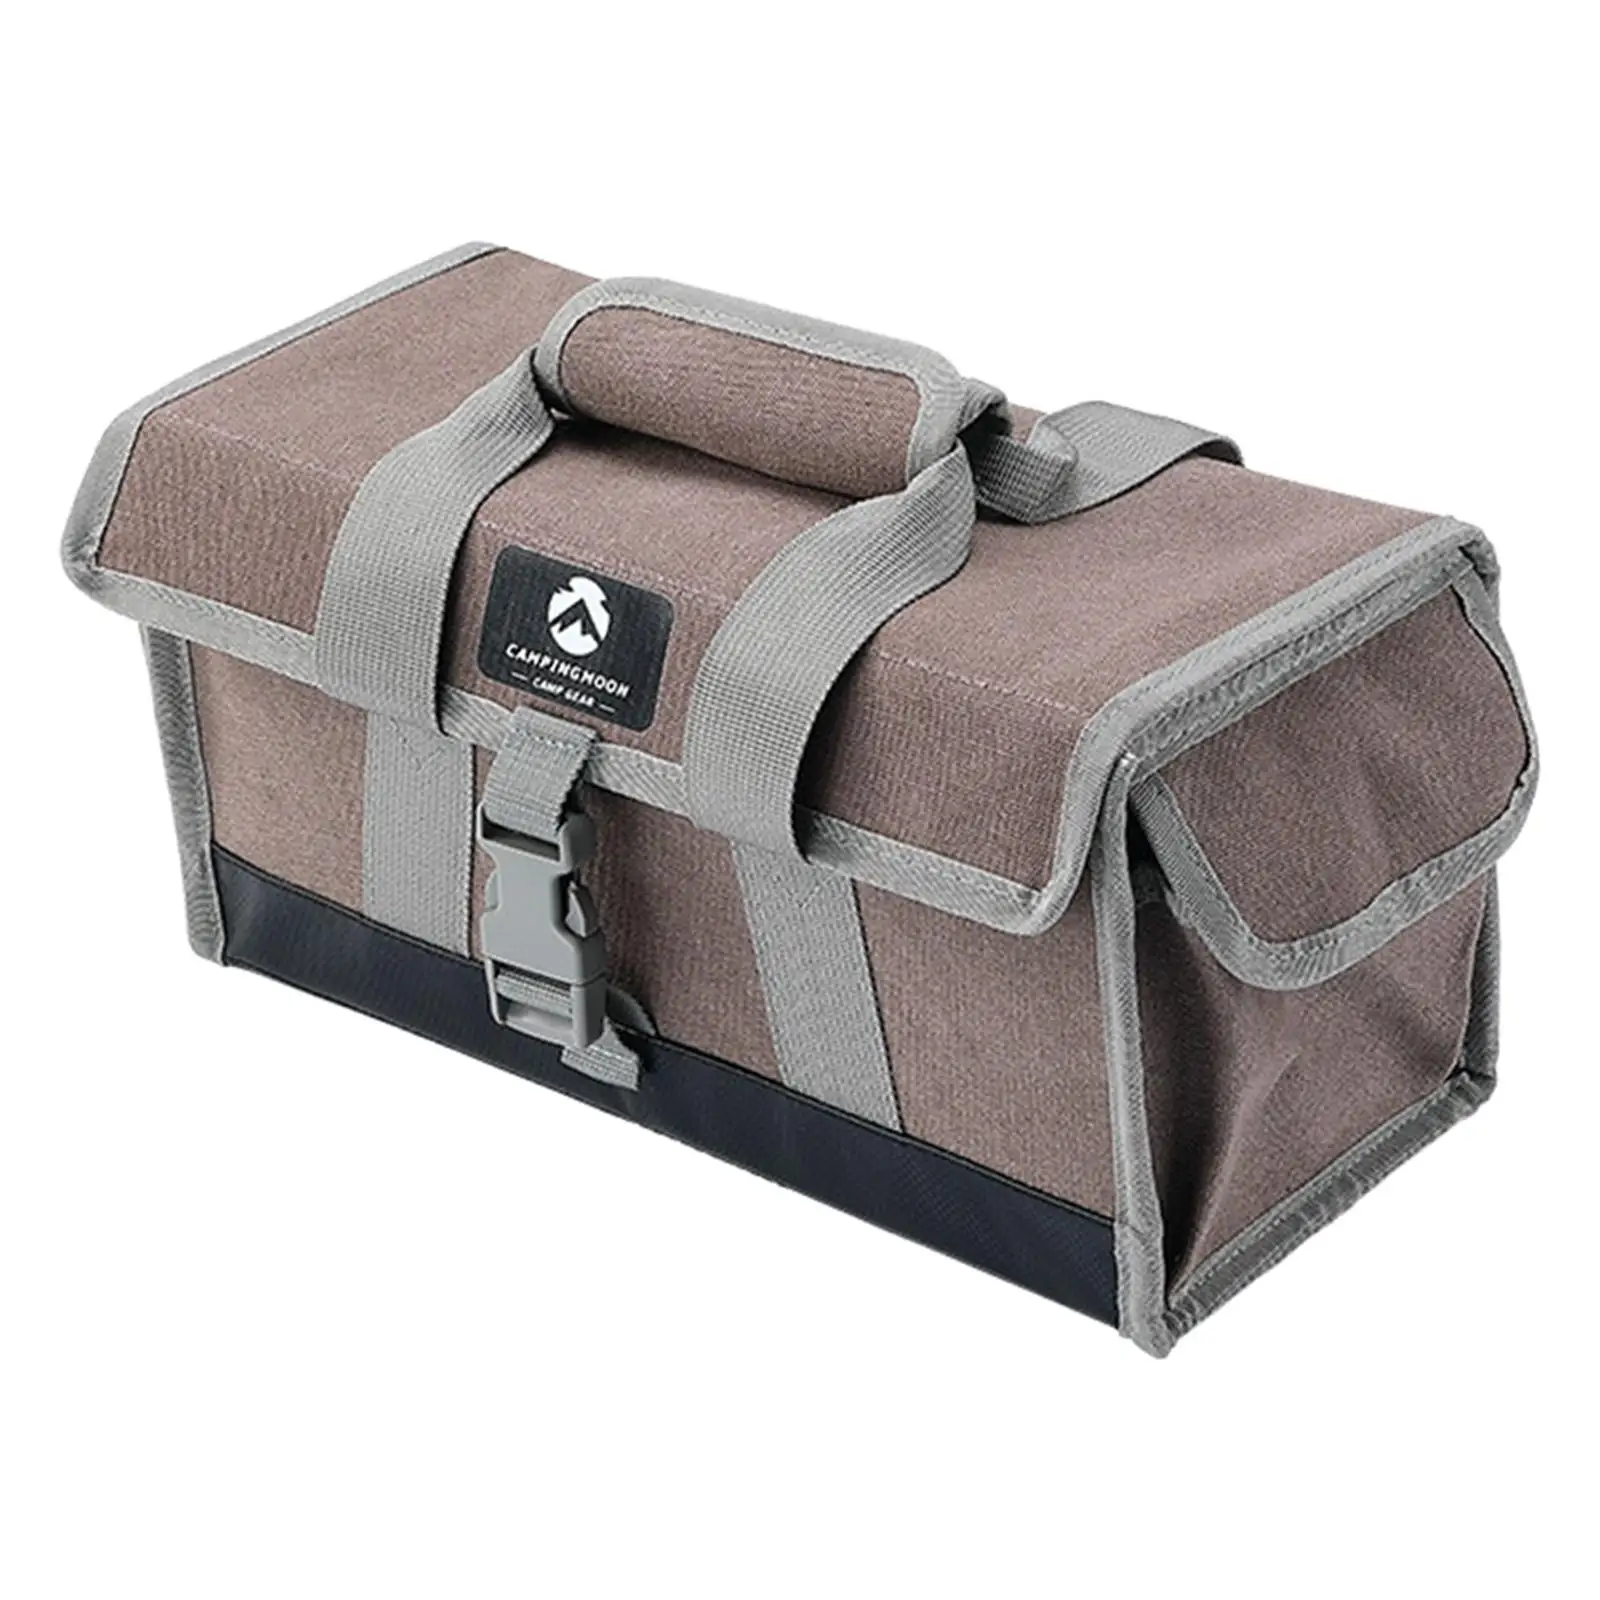 Foldable Camping Tool Bag Canvas Durable Large Capacity Storage Bag Pouch Handbag Container for BBQ Hiking Fishing Picnic Garden